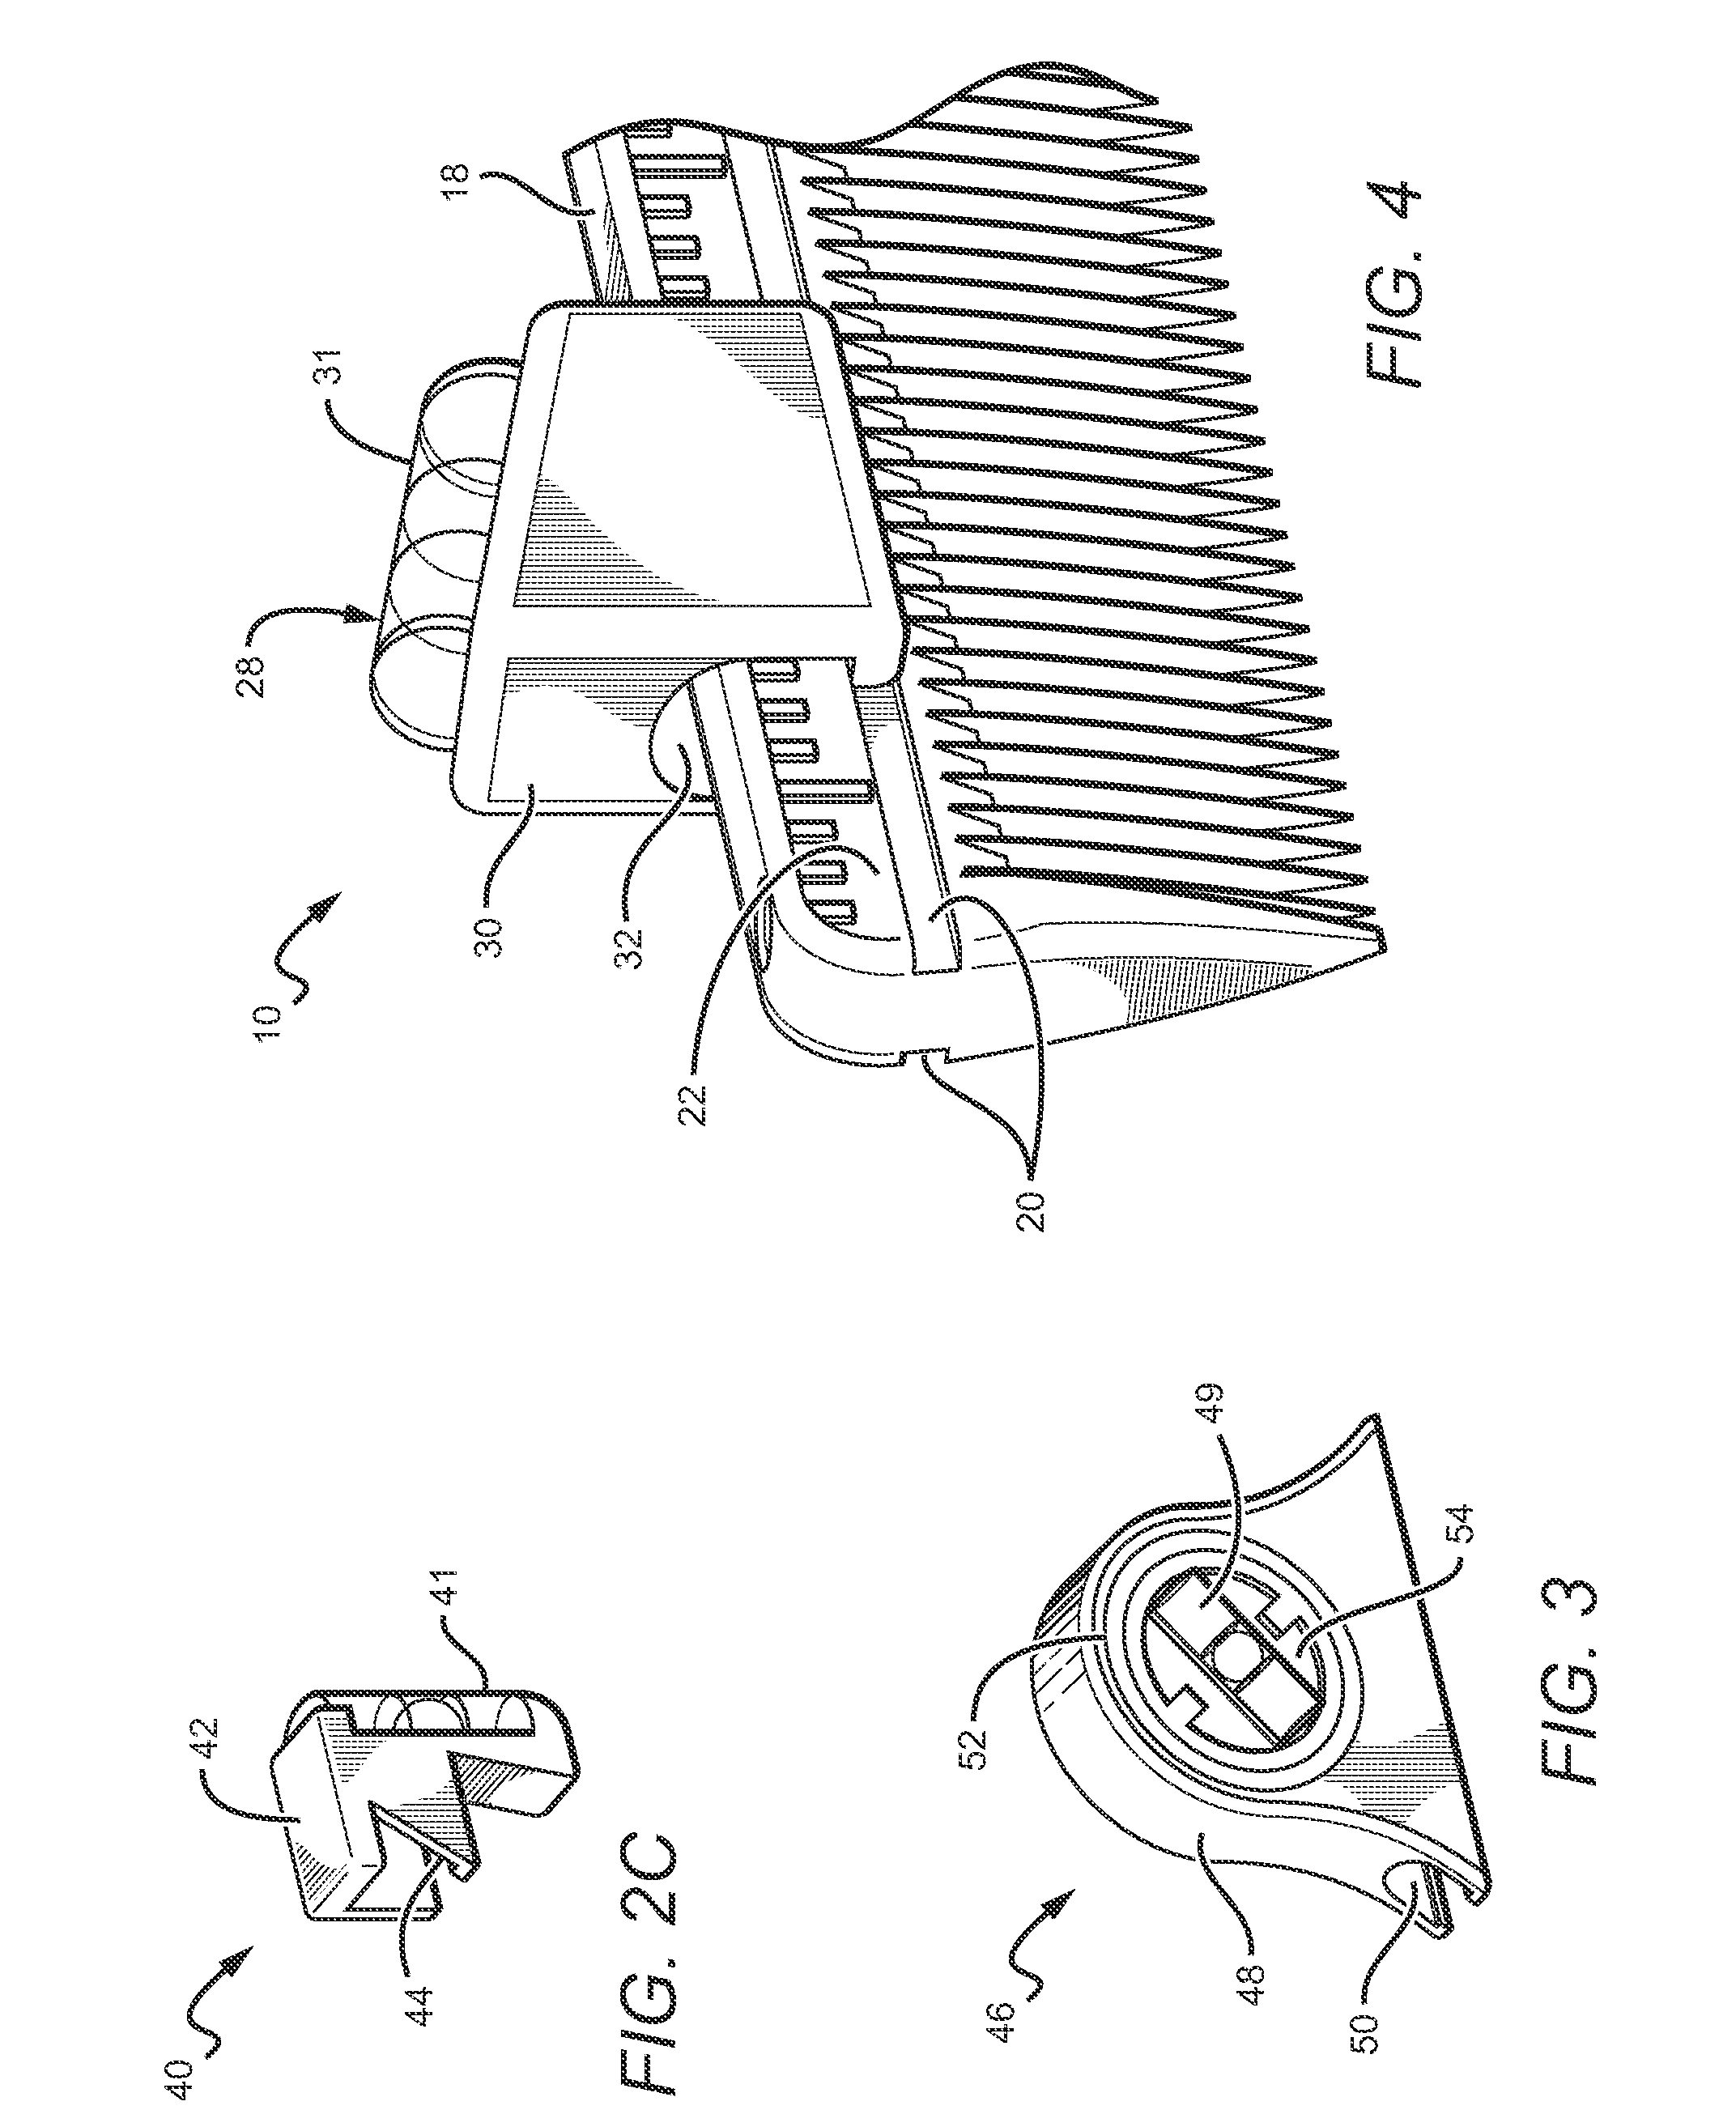 Flexible level system for a comb